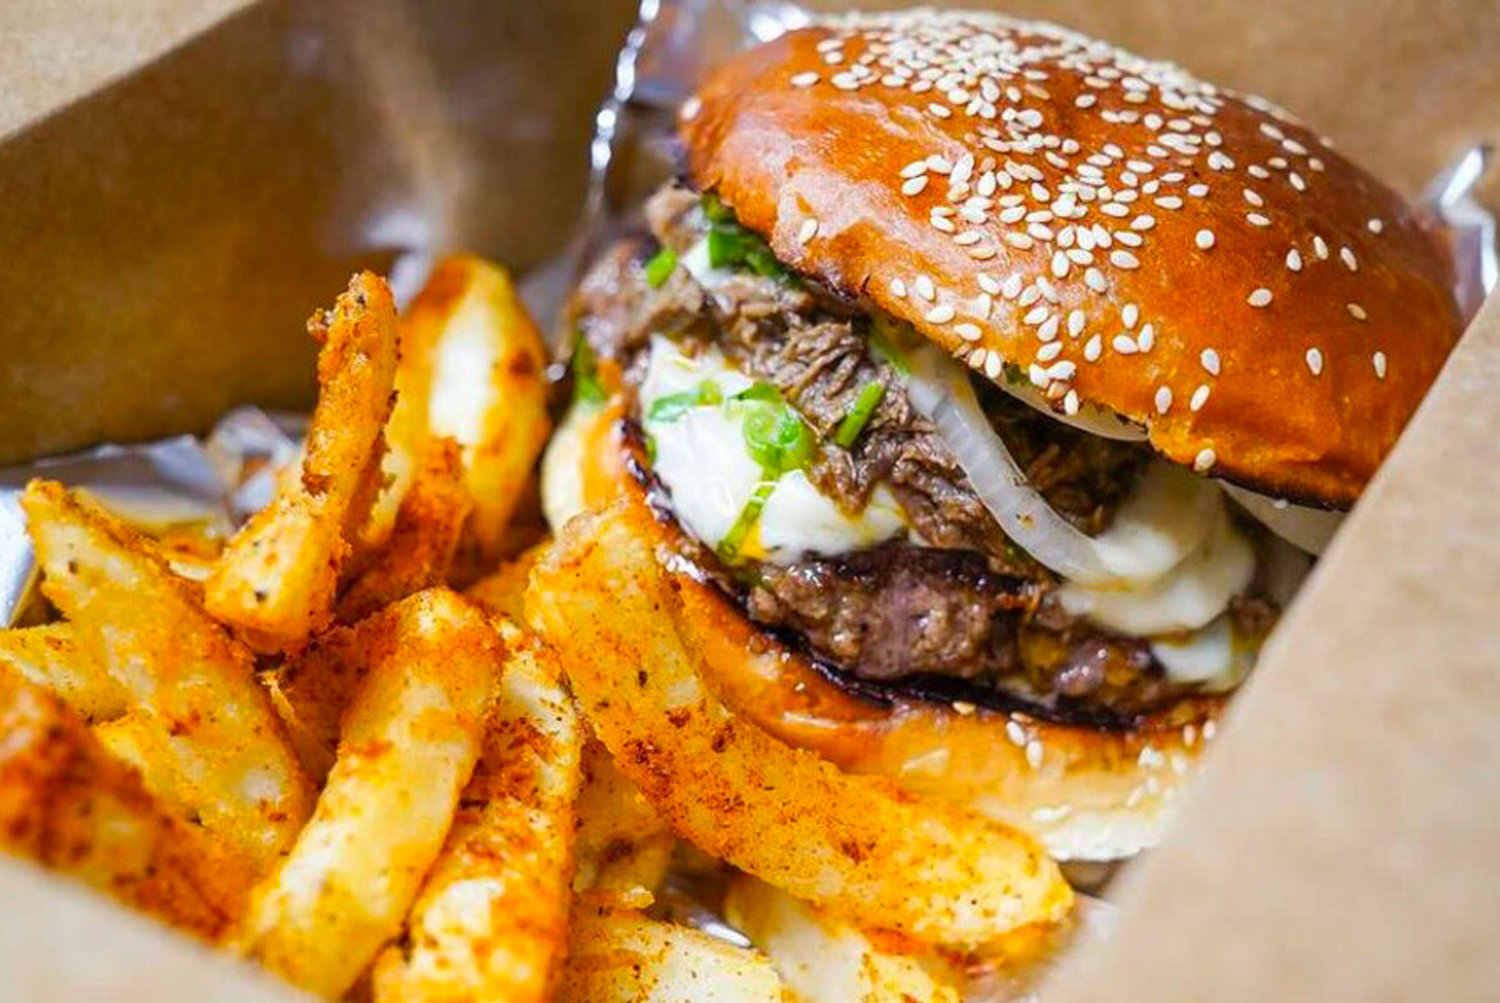 Latin American-inspired burger and fries from Trap Box